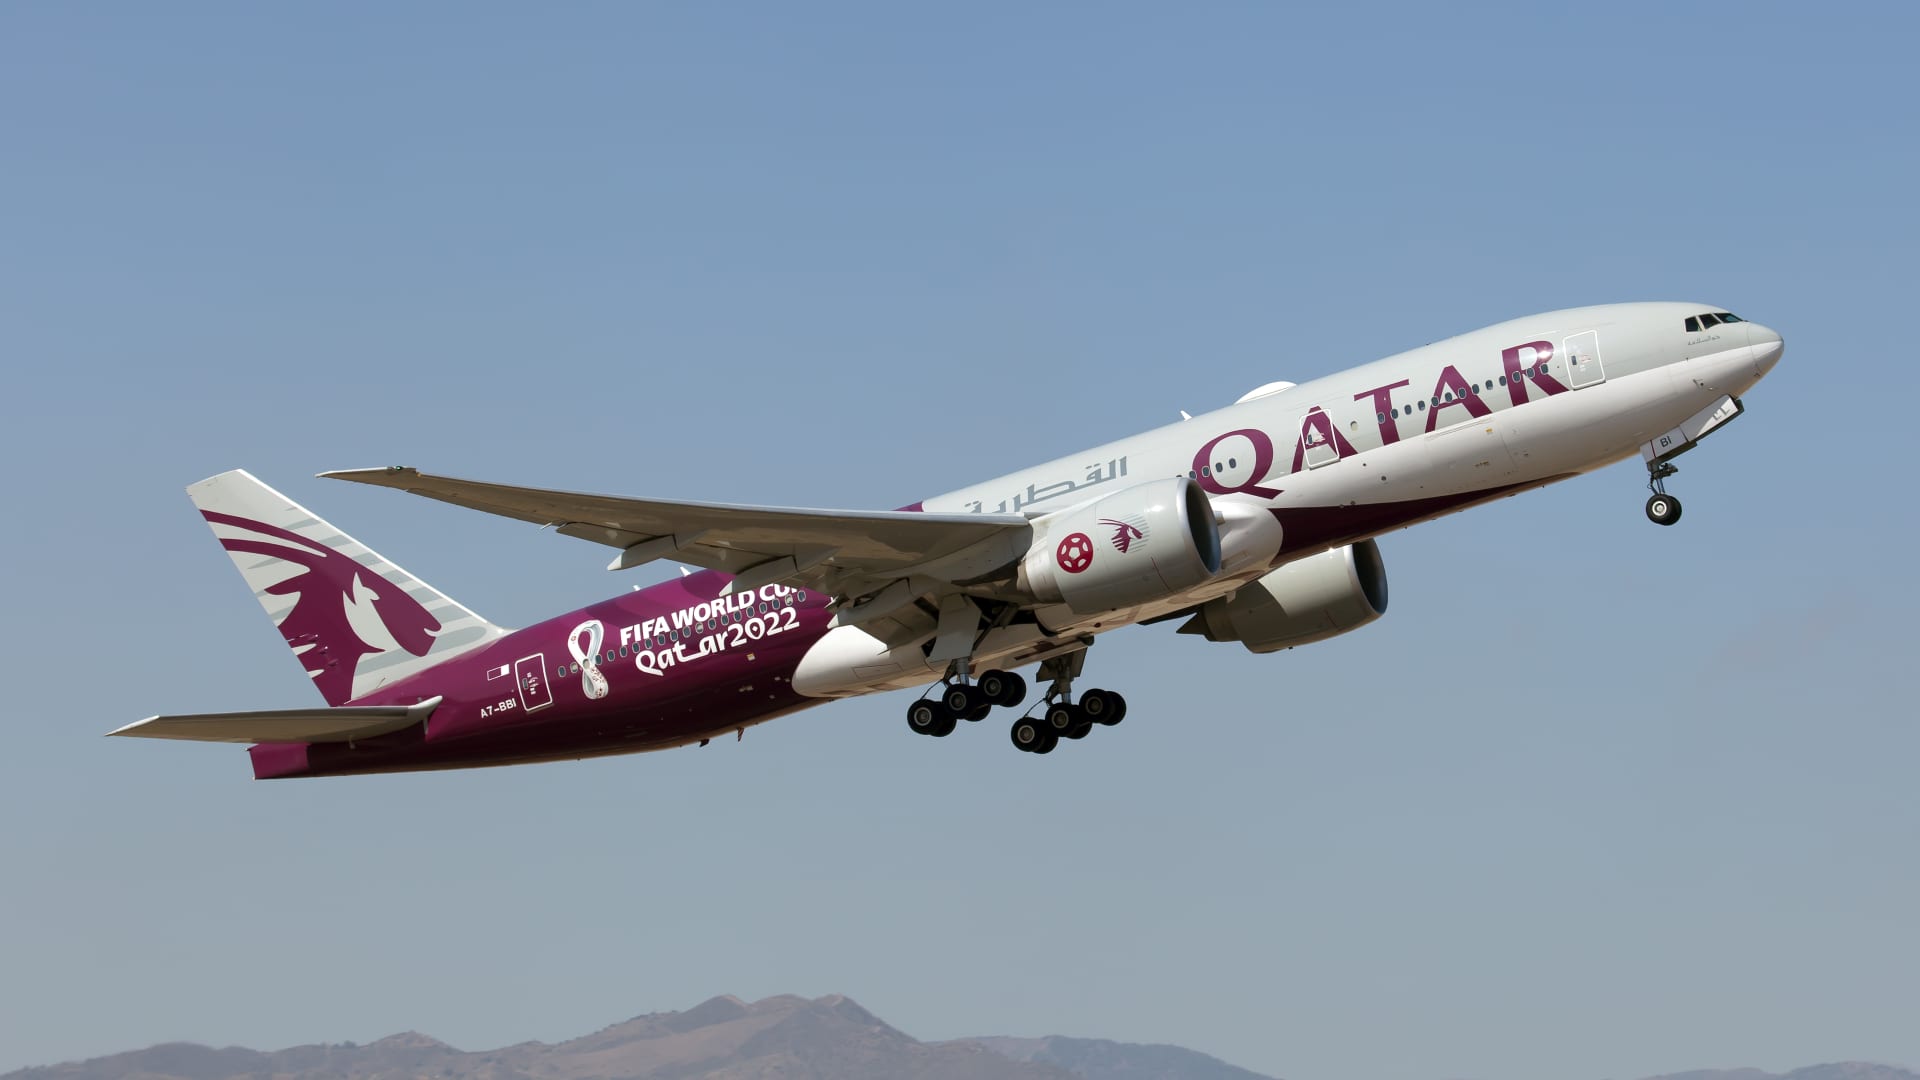 ‘We love competition’: Qatar Airways CEO welcomes new Saudi carrier